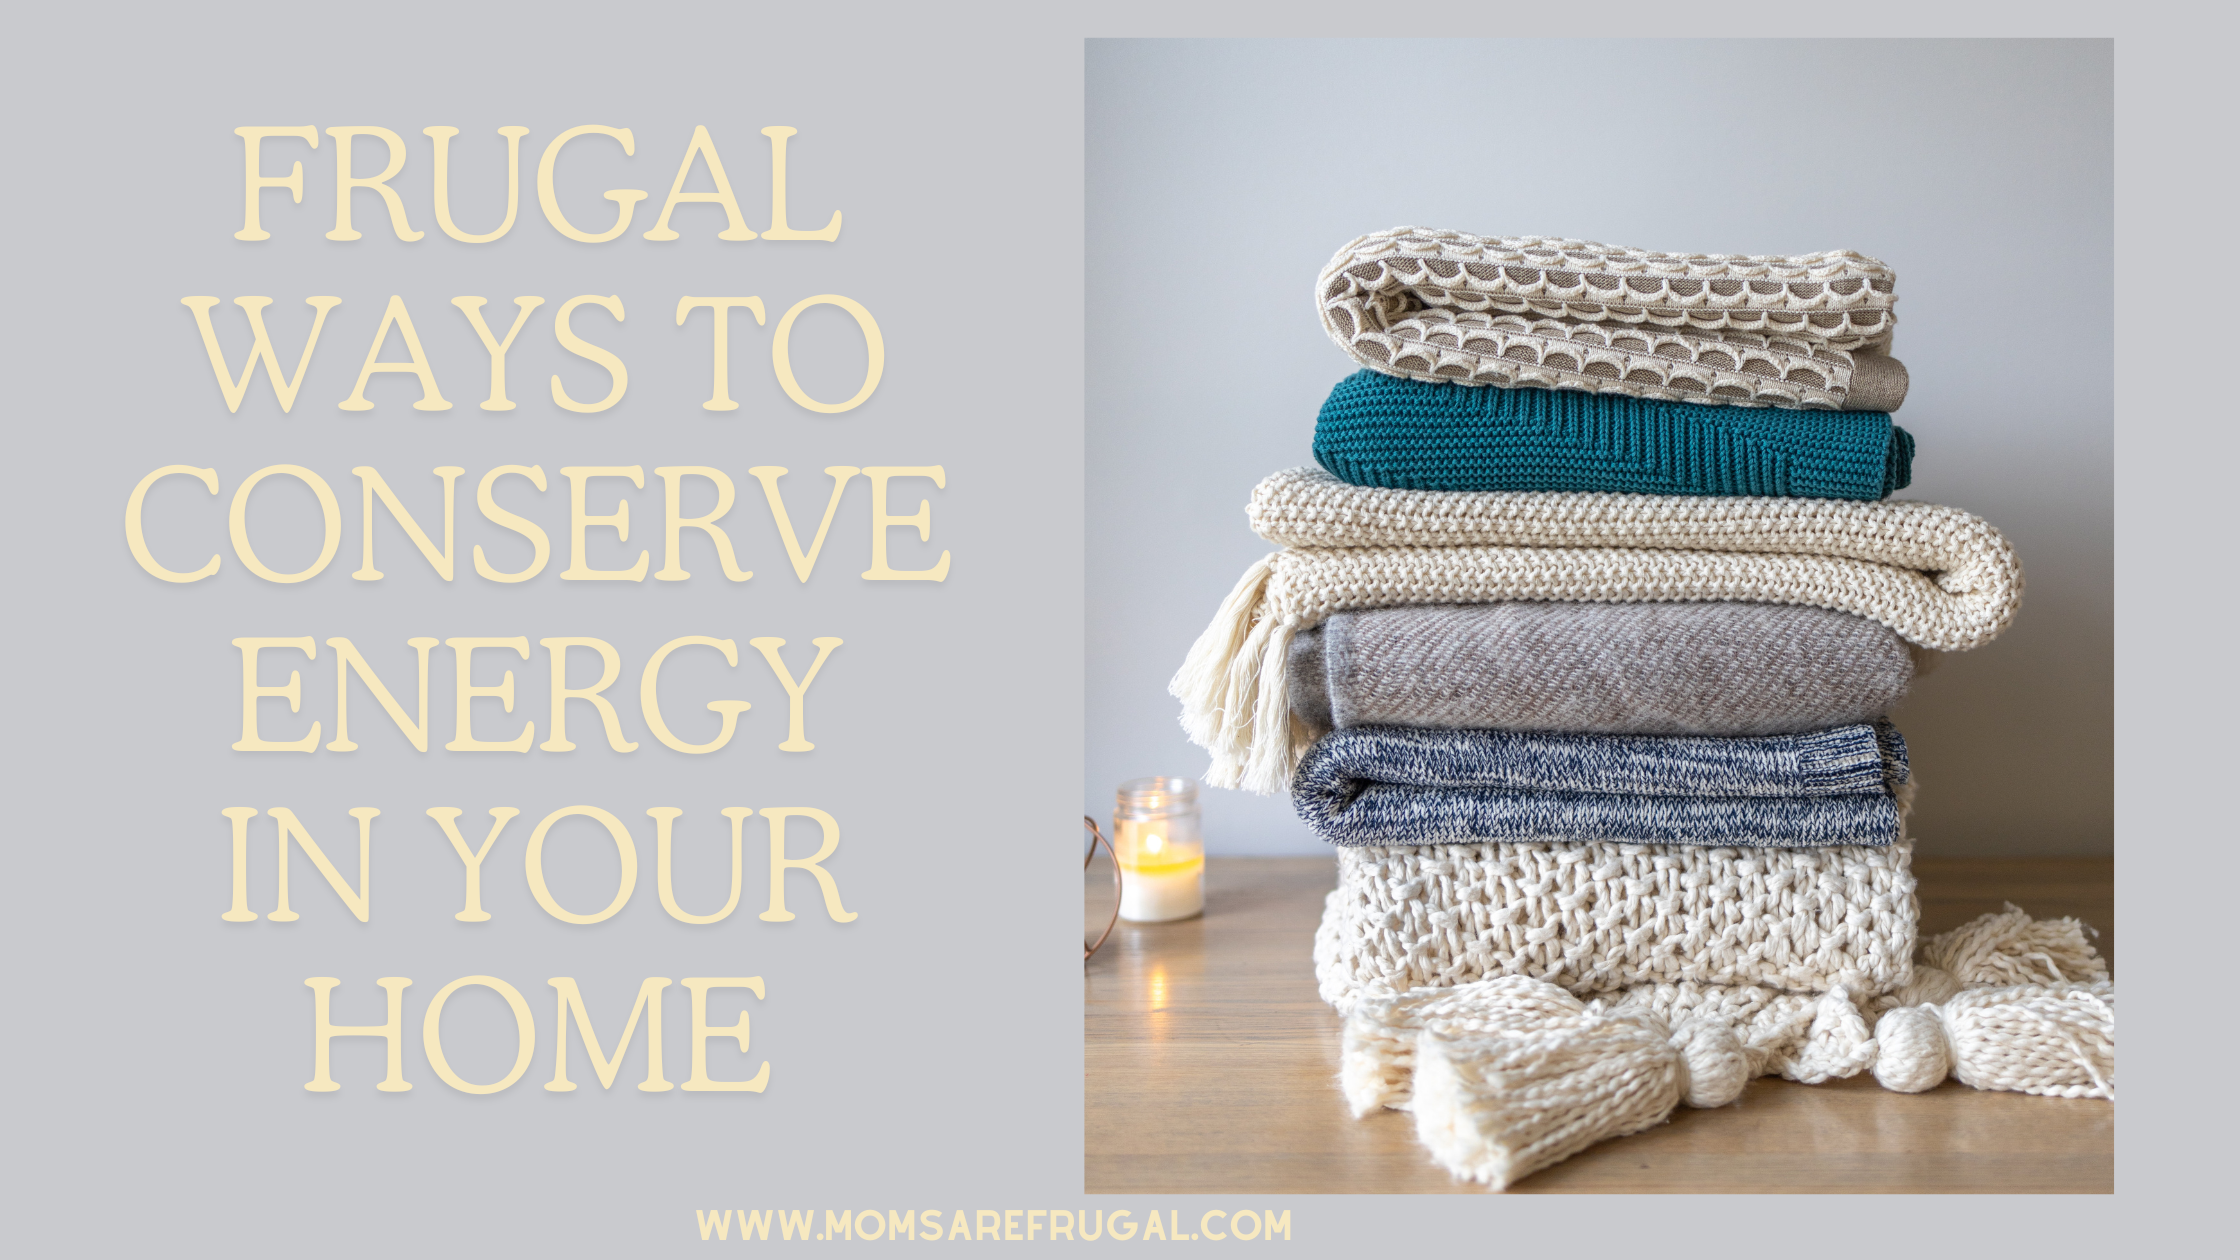 Frugal Ways to Conserve Energy In Your Home